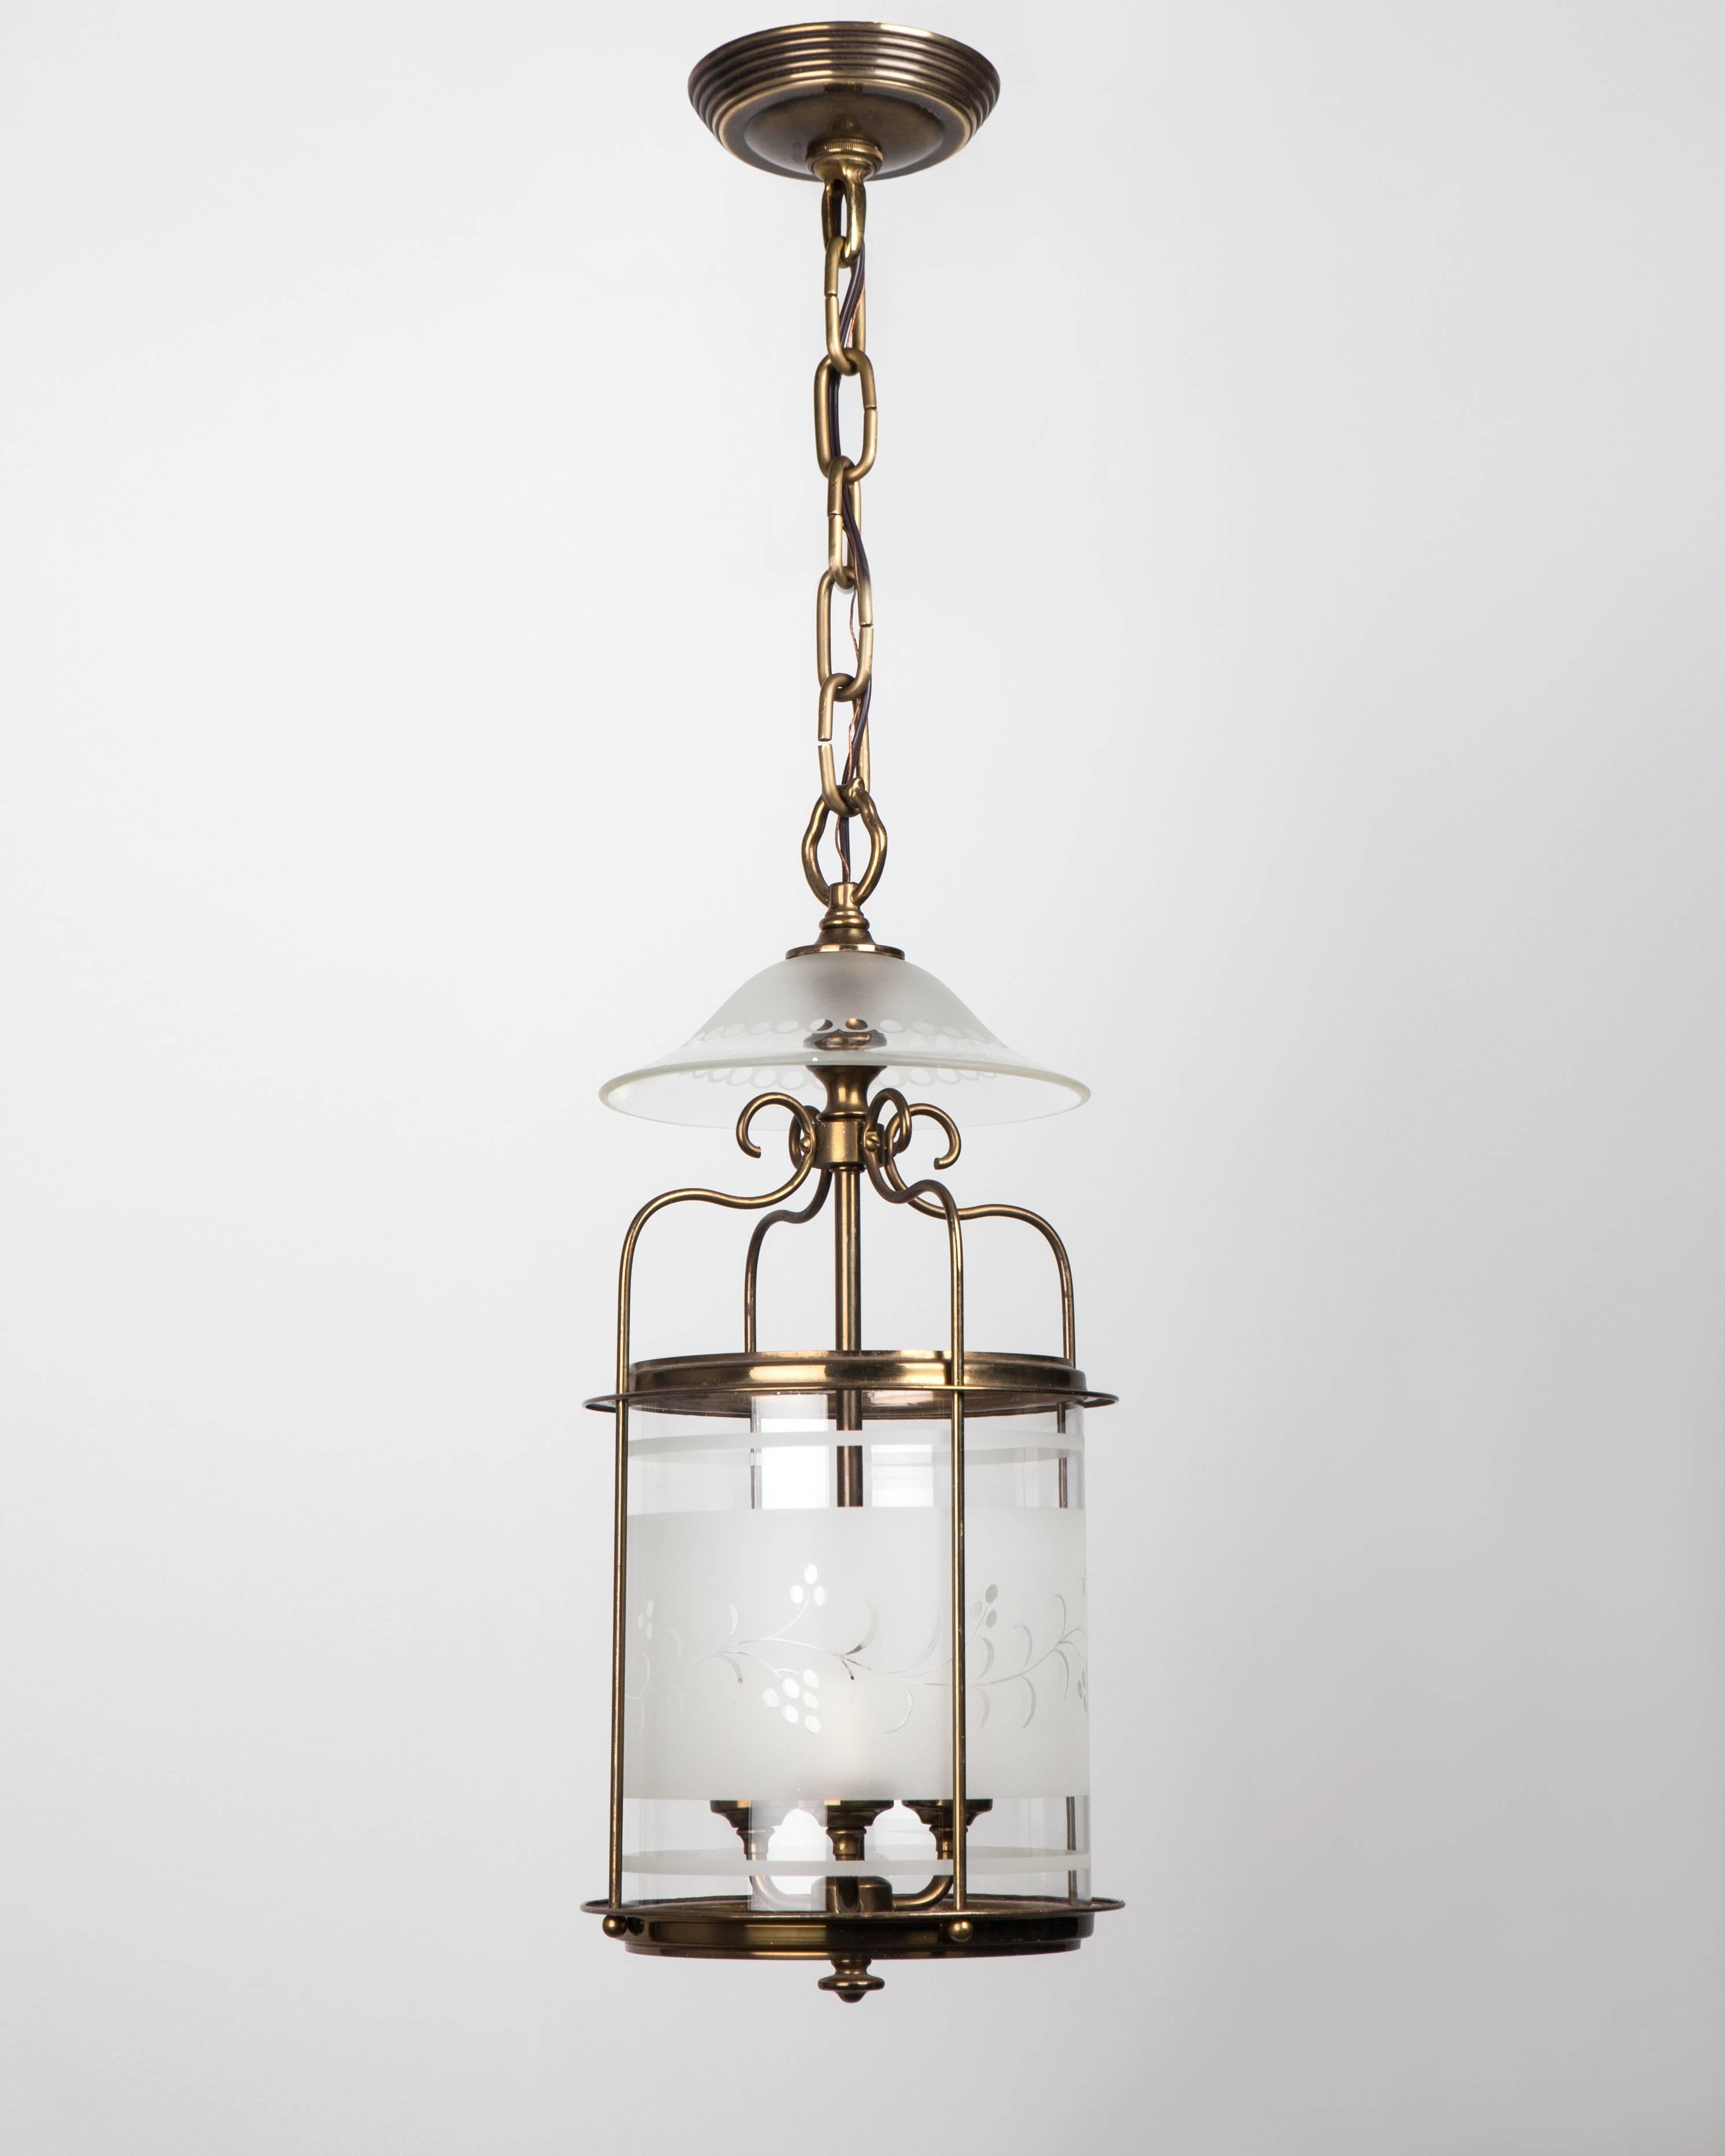 AHL4006
An antique lantern with a brass frame holding an etched and wheel-cut cylinder lens. The whole is topped by a glass smoke bell. Due to the antique nature of this fixture, there may be some nicks or imperfections in the